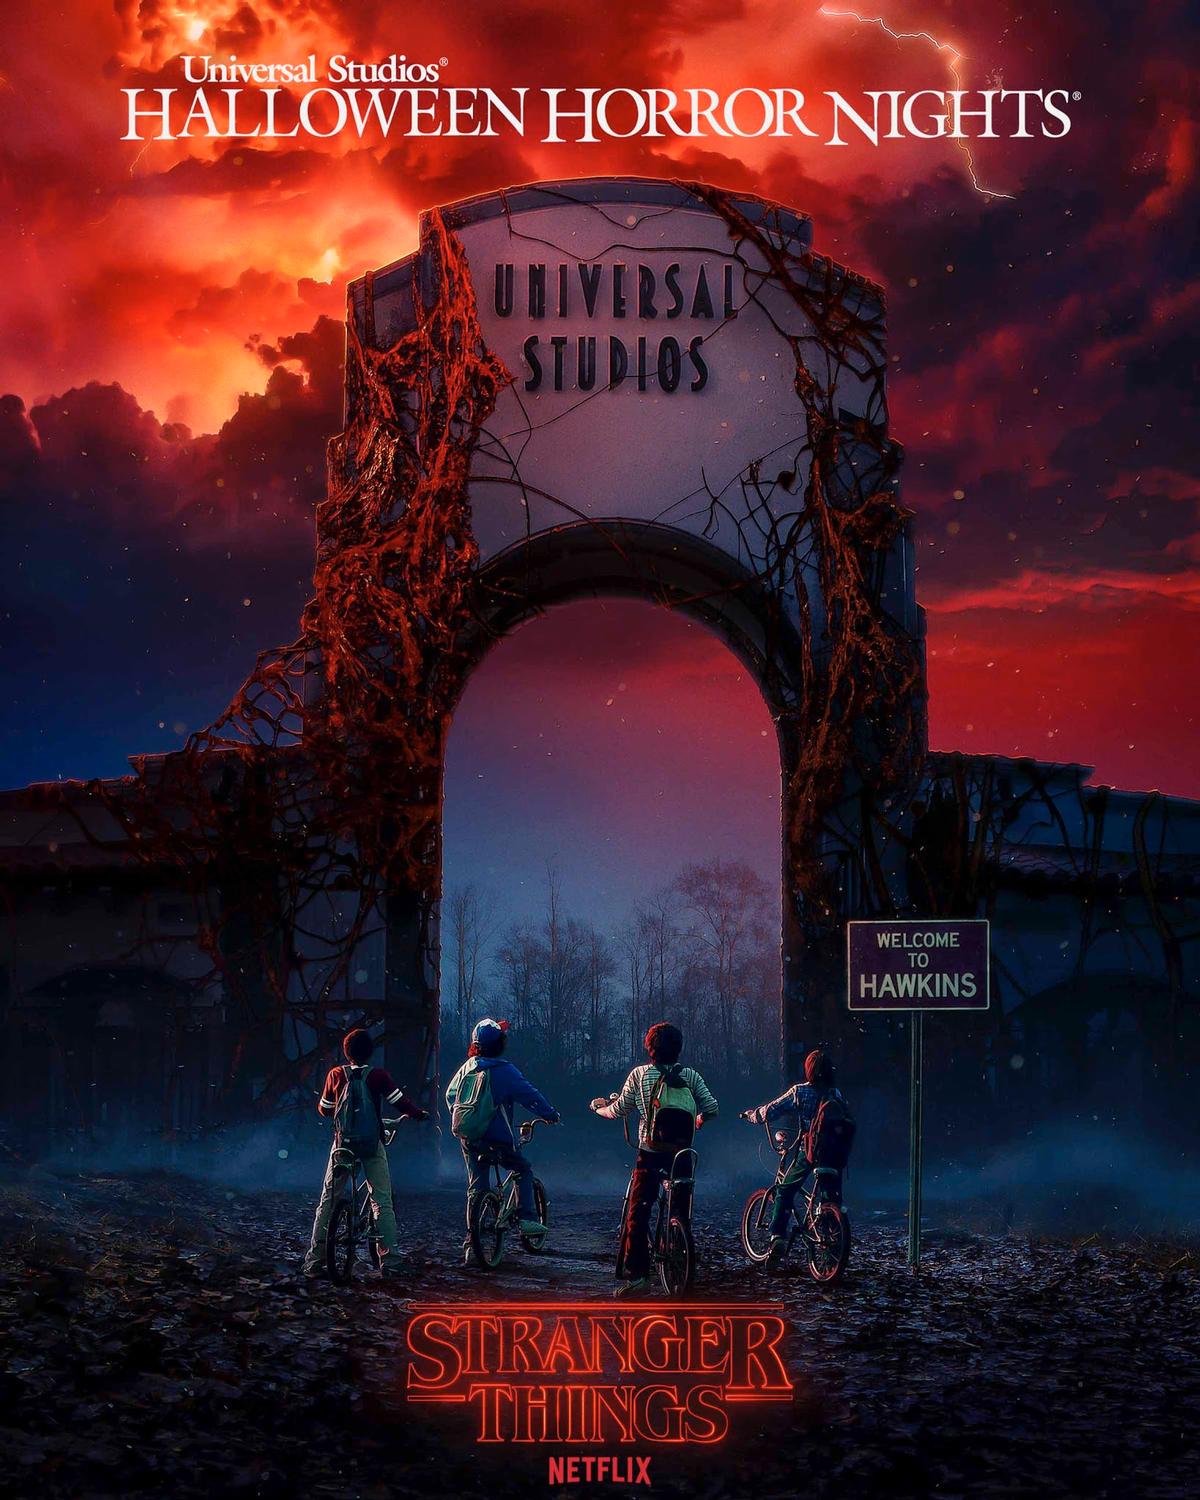 Stranger Things will make its theme park debut at Universal's Halloween Horror Nights in Orlando, Hollywood and Singapore / Universal Studios